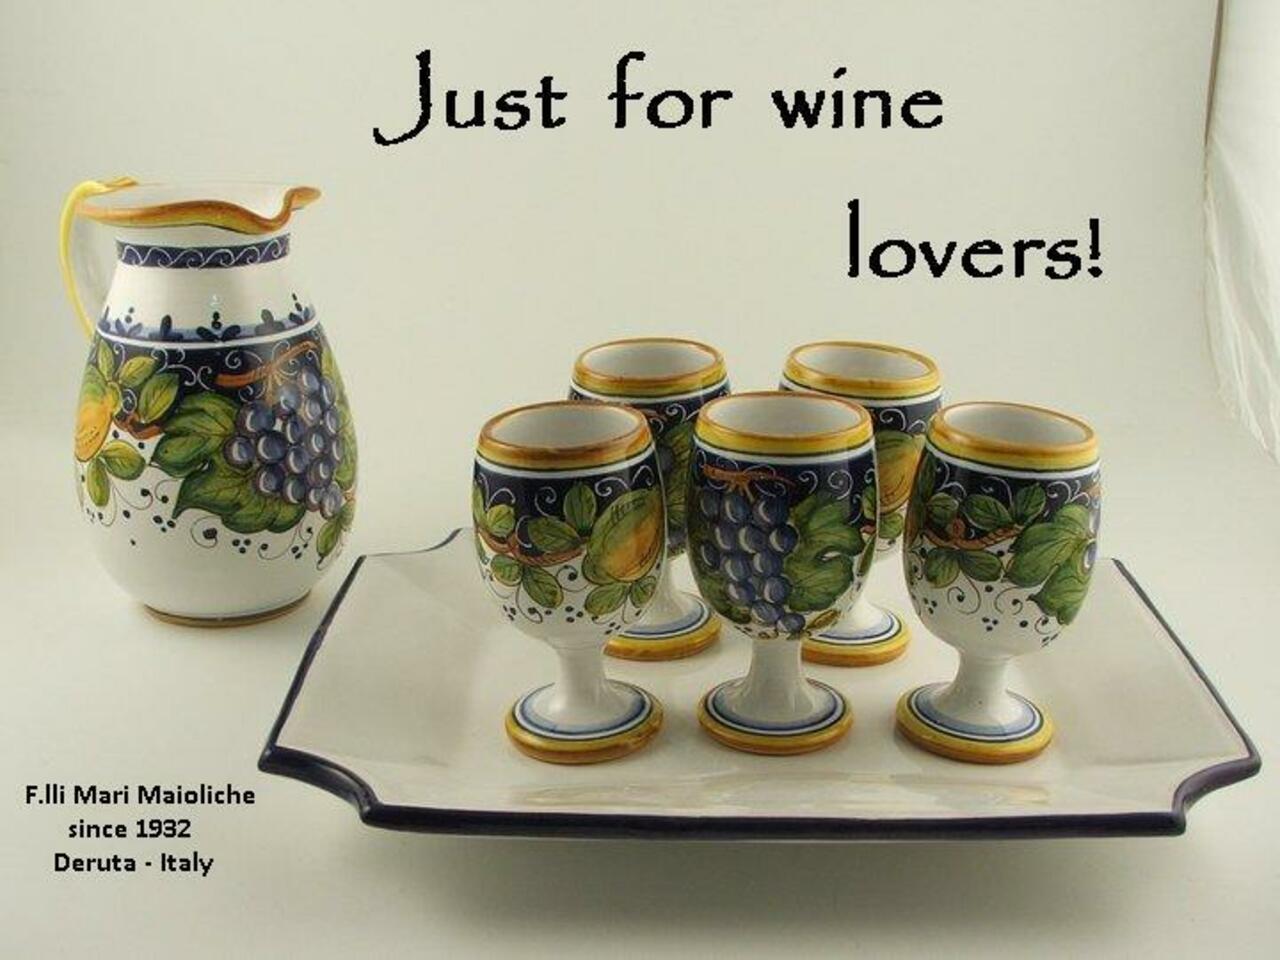 Bacco decoration by @FratelliMari ... Just for wine lovers! #autumn #grapes #wine #umbria #ceramics #madeinitaly #art http://t.co/BcYcCO7nGT